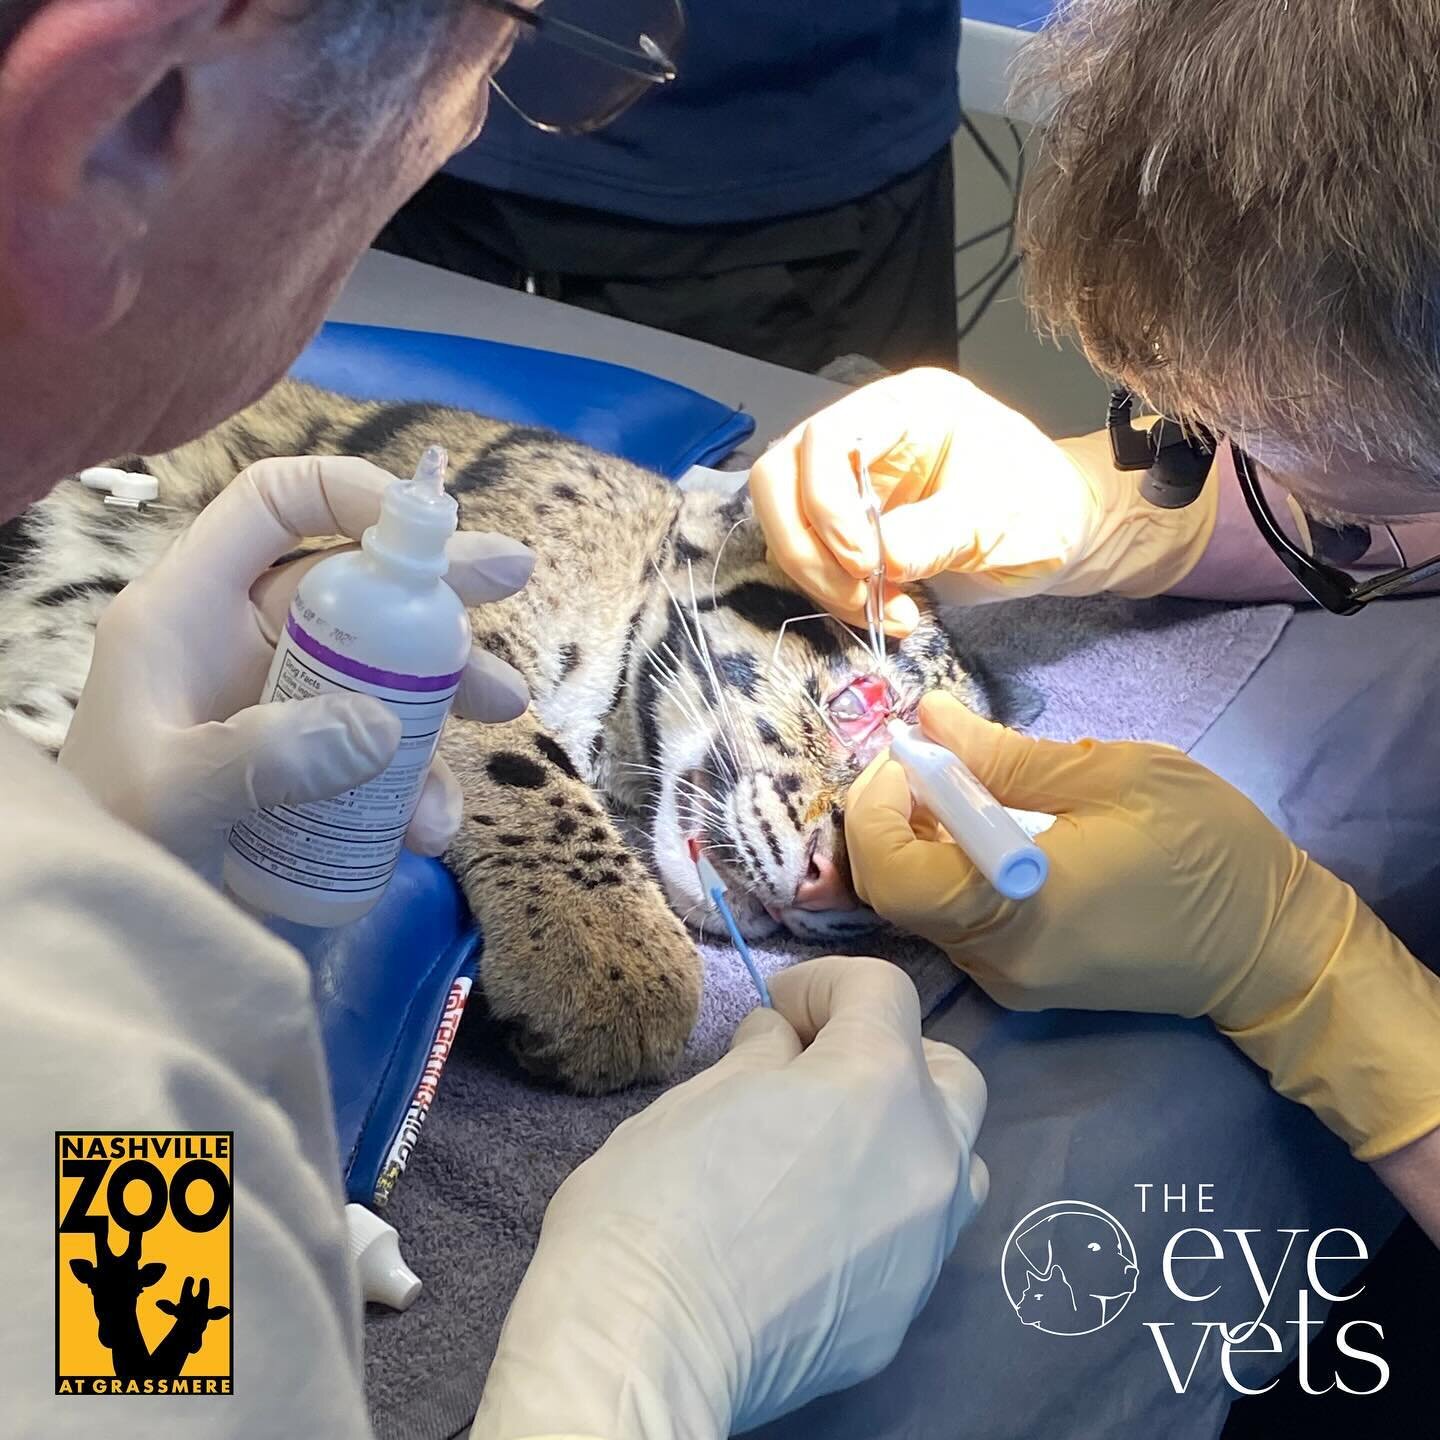 The Eye Vets visits the Nashville Zoo! Dr. Bergstrom and Dr. Lou Laratta had the opportunity to operate on one of the treasured Clouded Leopard cubs at the zoo. The cub began squinting its right eye and was found to have a dermoid - a piece of haired